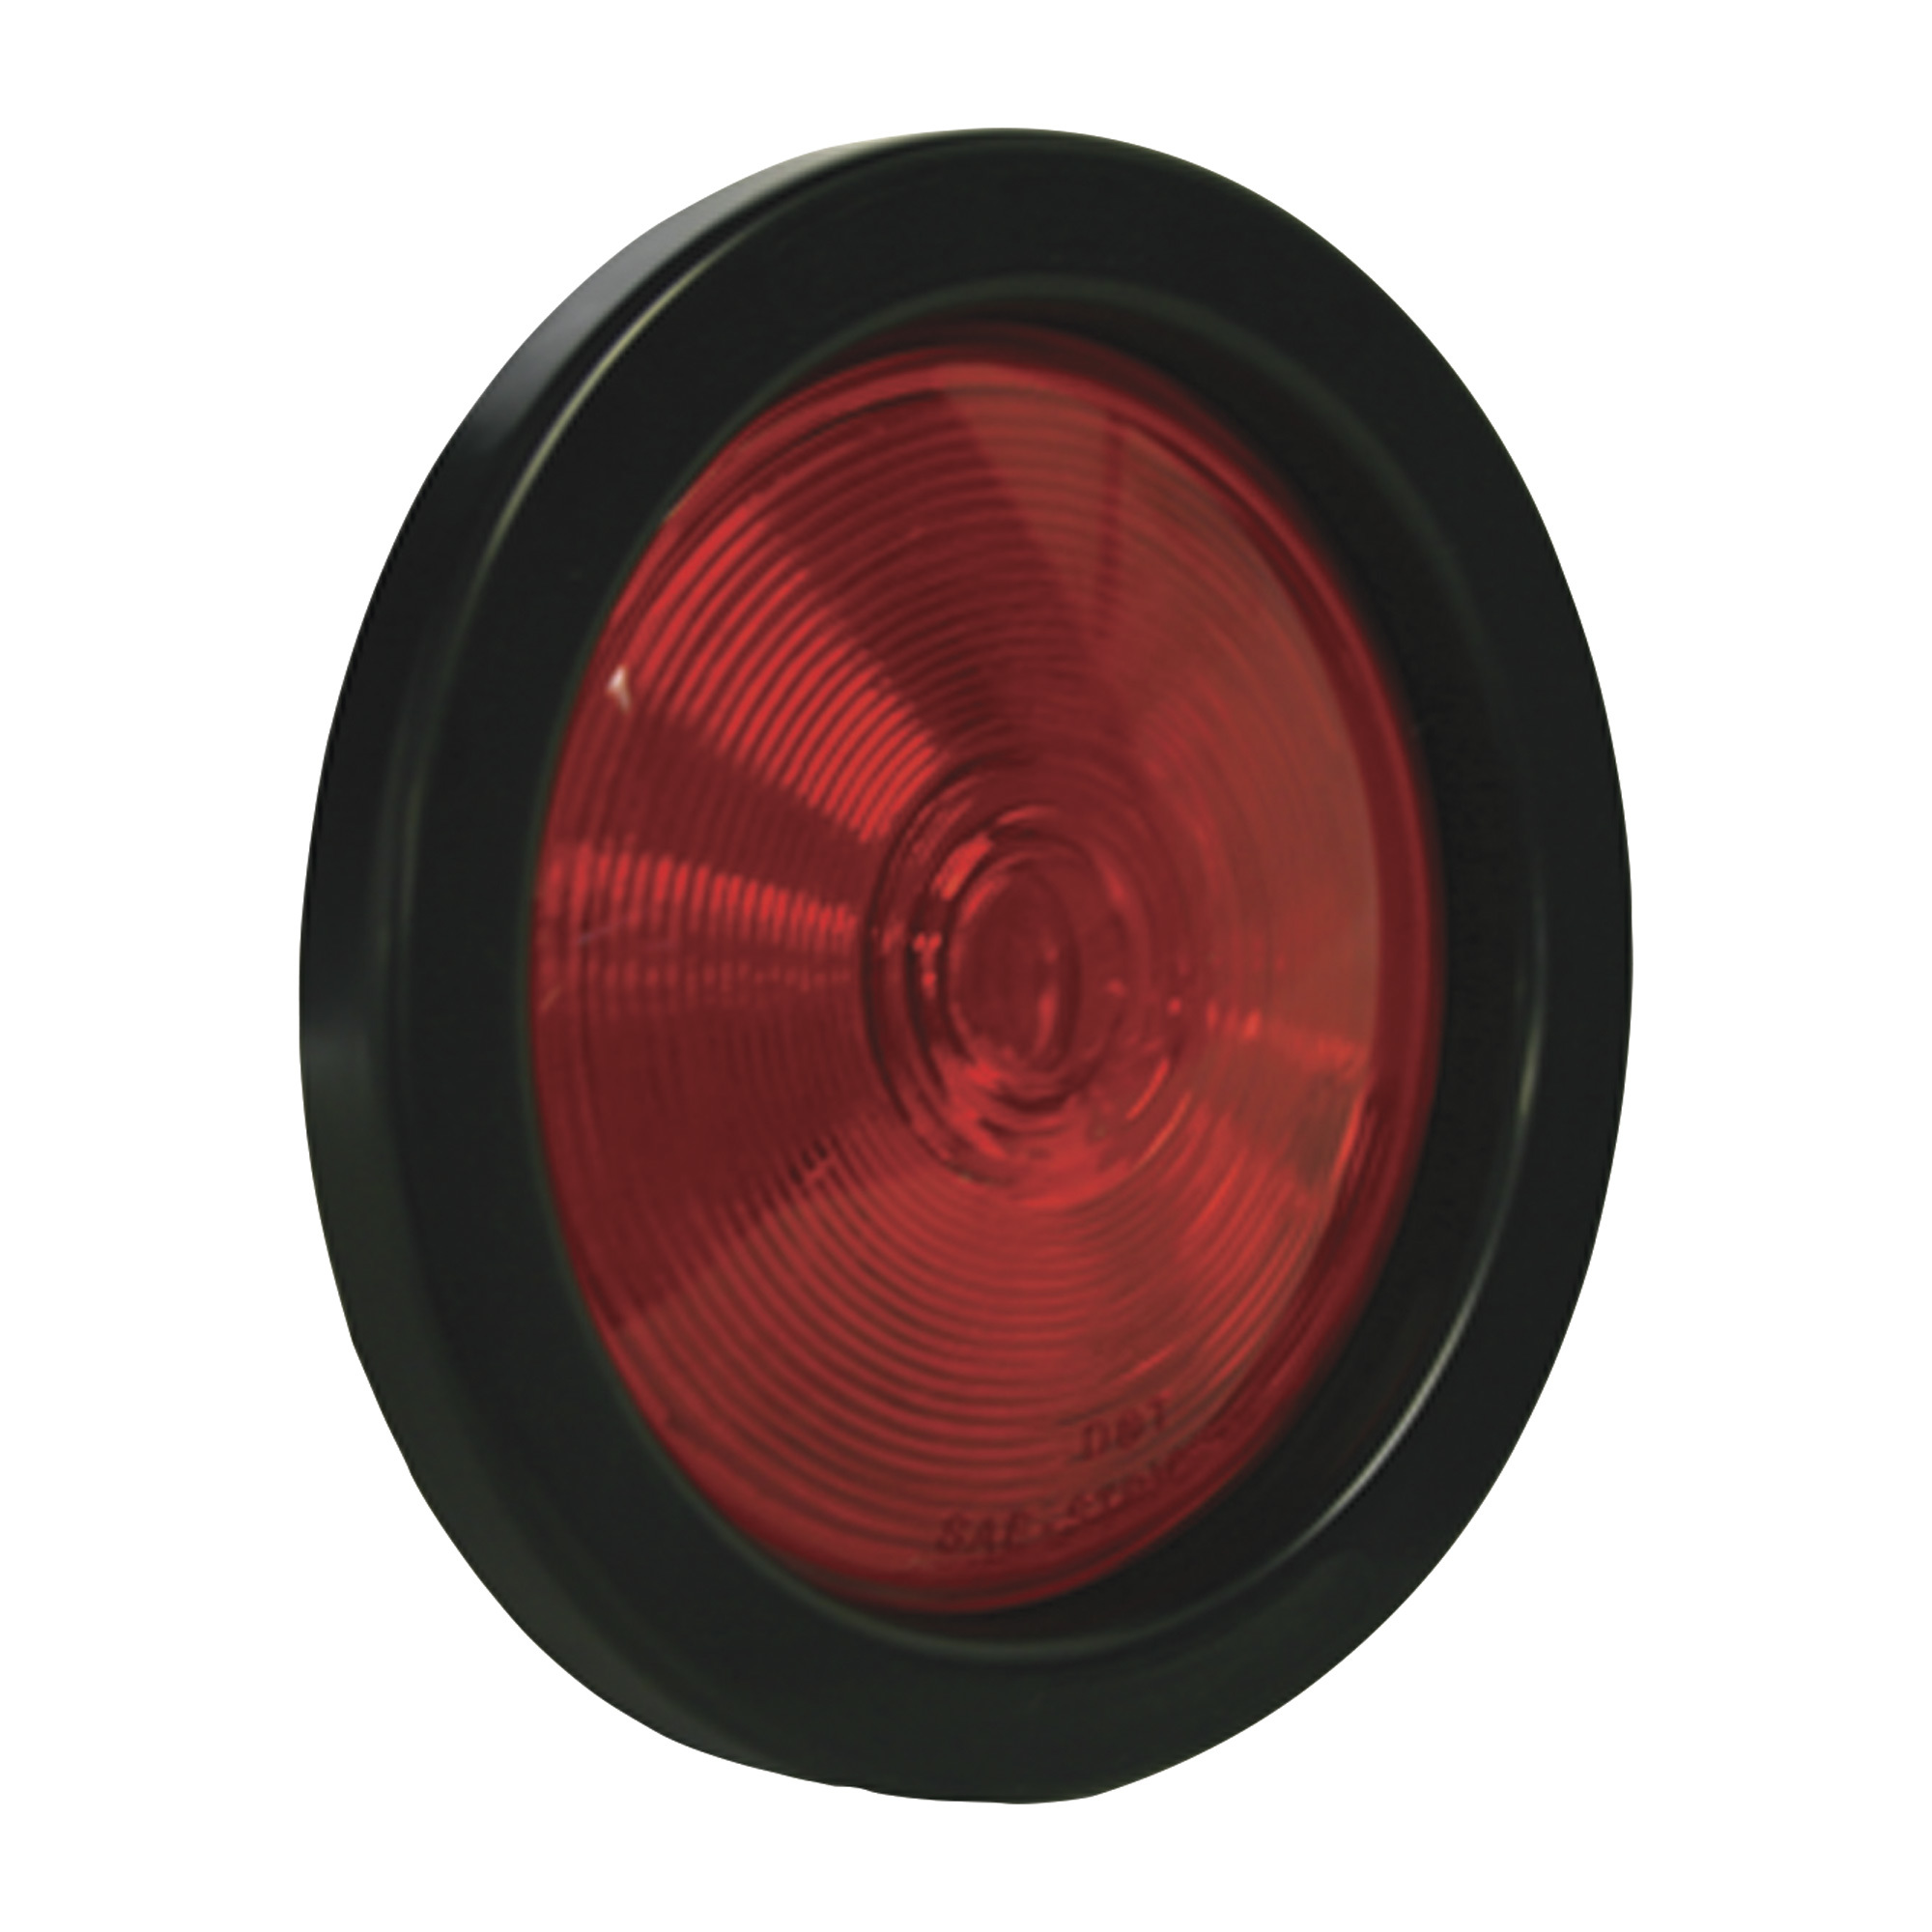 Hopkins Towing Solutions T95BR 4in. Sealed Round Stop/Tail/Turn Light, Red - image 1 of 2